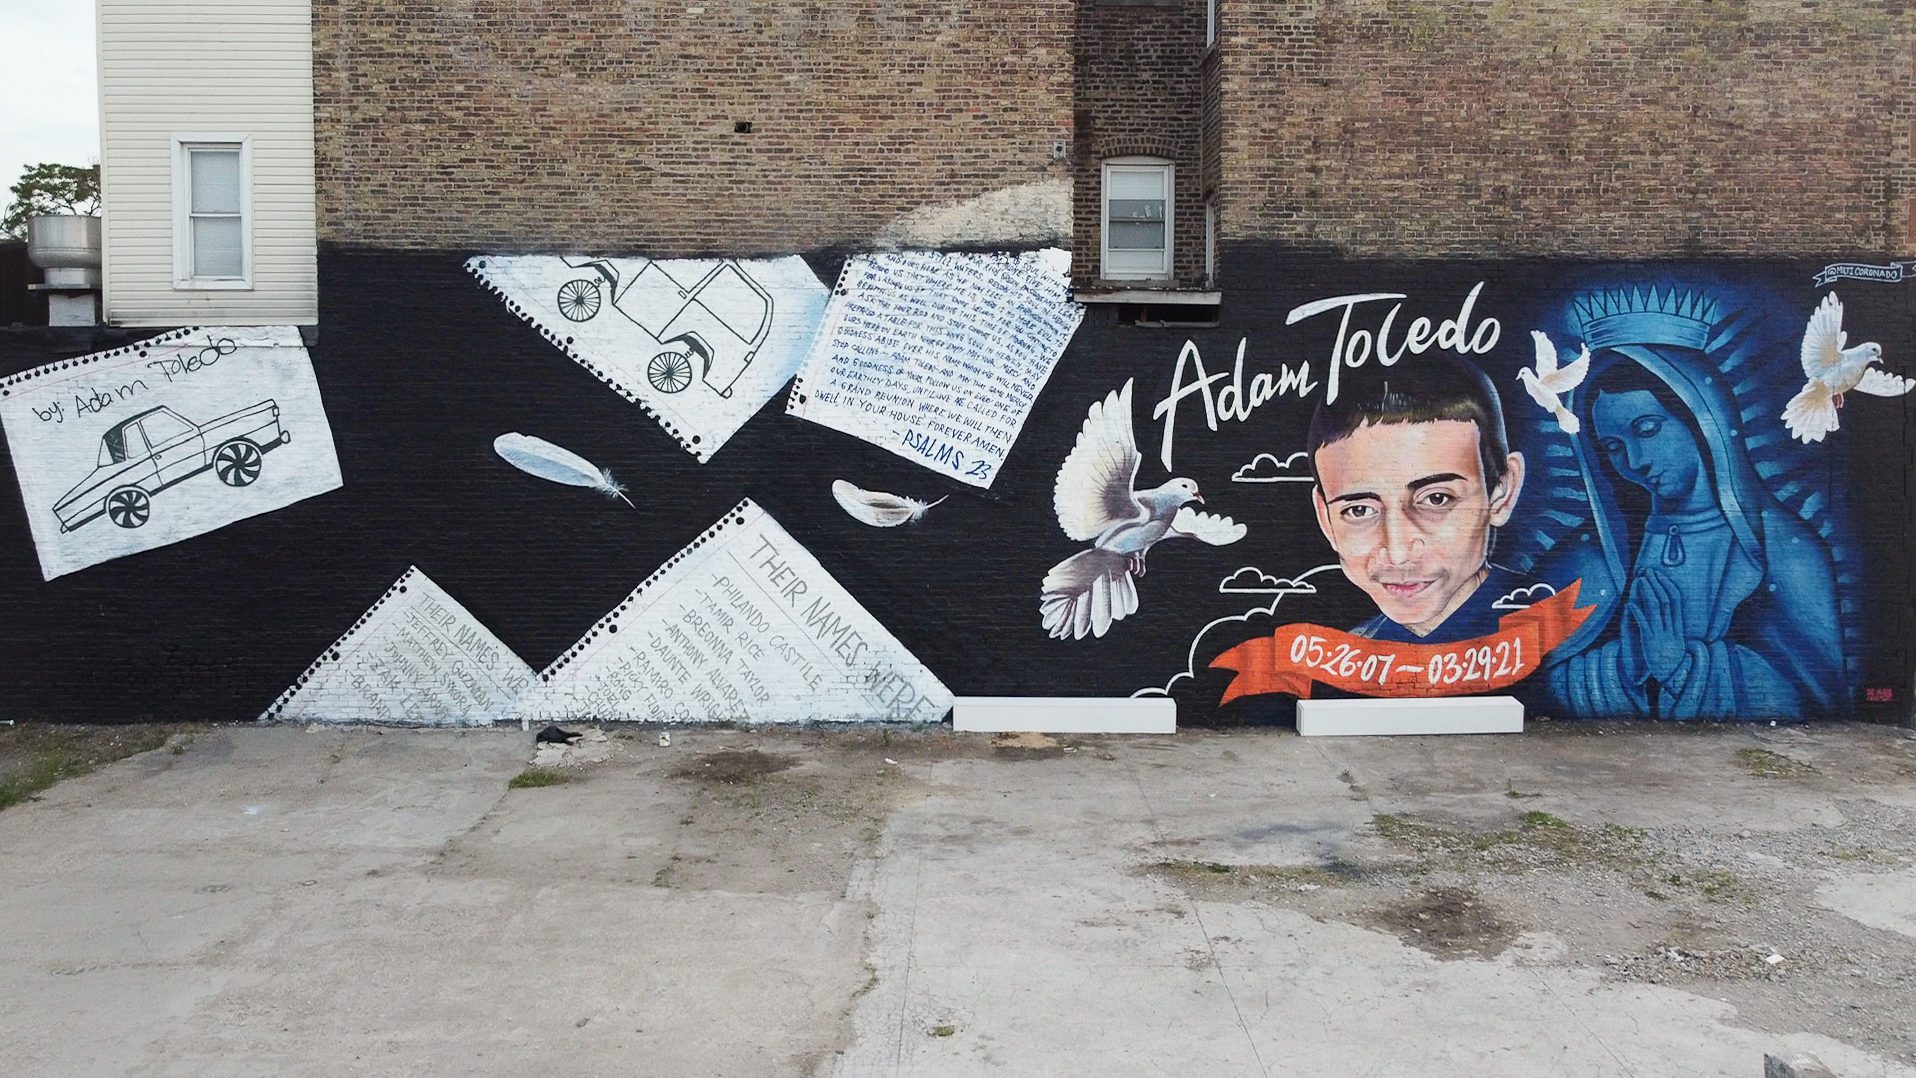 The mural of Adam Toledo shows his face "05.26.07 - 03.29.21" the virgin Mary, birds and ripped out notebook paper with drawings, a psalm and the names of other victims of gun violence